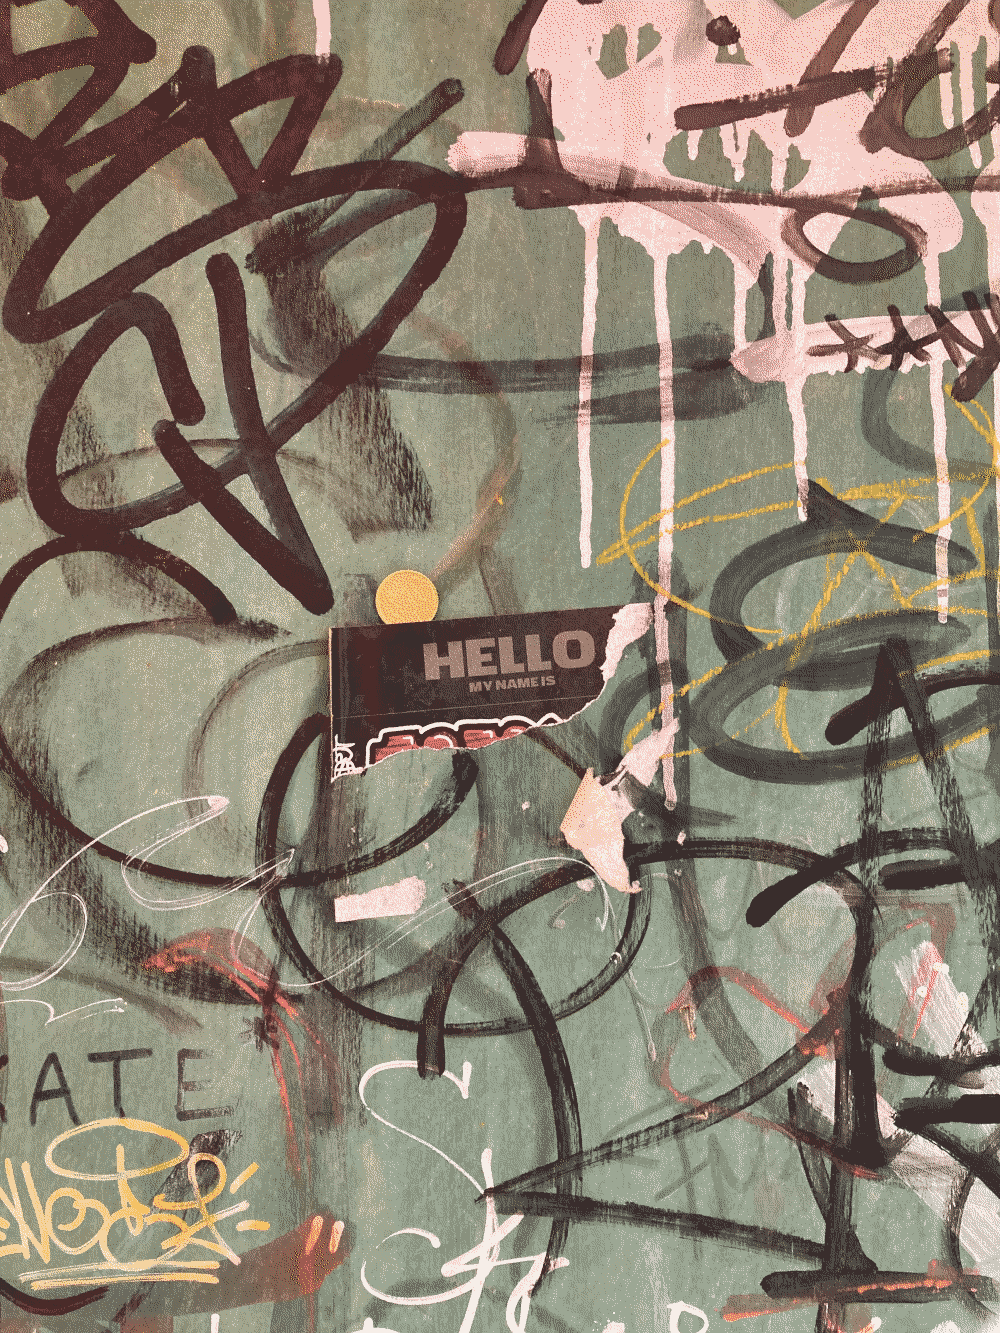 A coin is partway slipped behind a sticker reading HELLO, which is itself peeling off a graffiti-covered door.